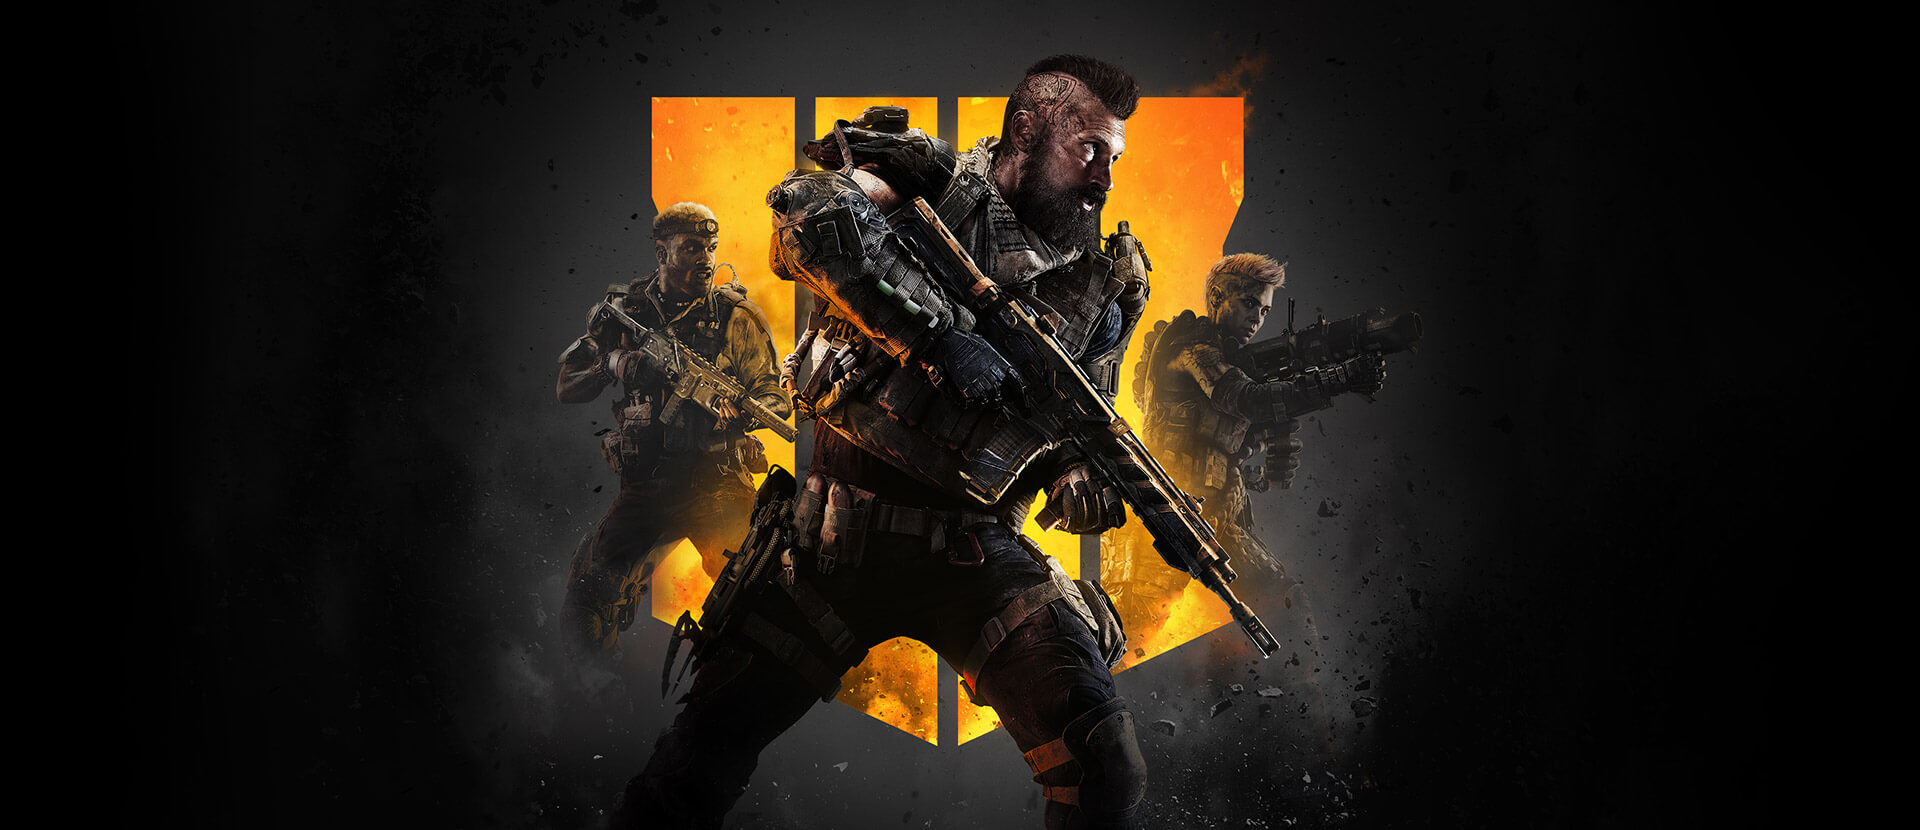 Call of Duty: Black Ops 4 ya disponible para Xbox One, PlayStation 4 y PC